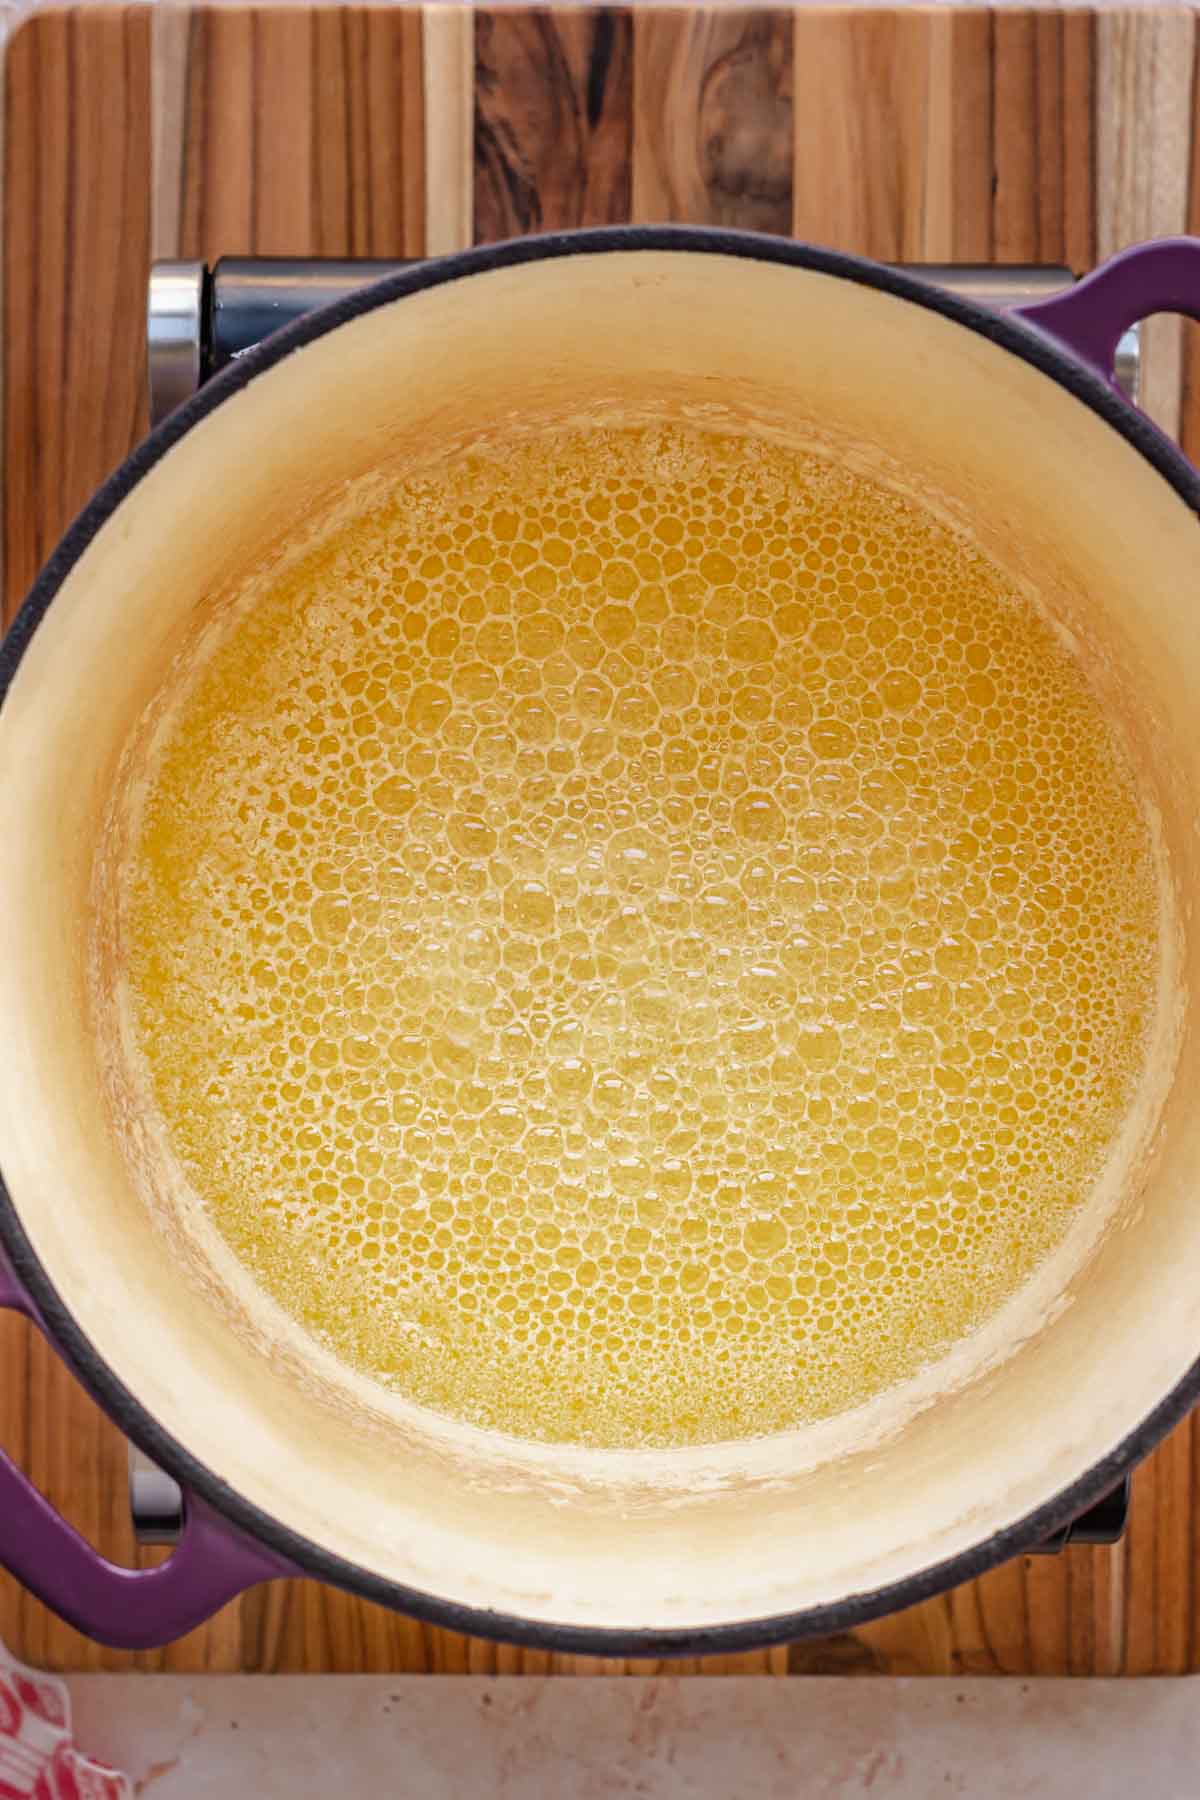 Butter melted and bubbling in a pot.